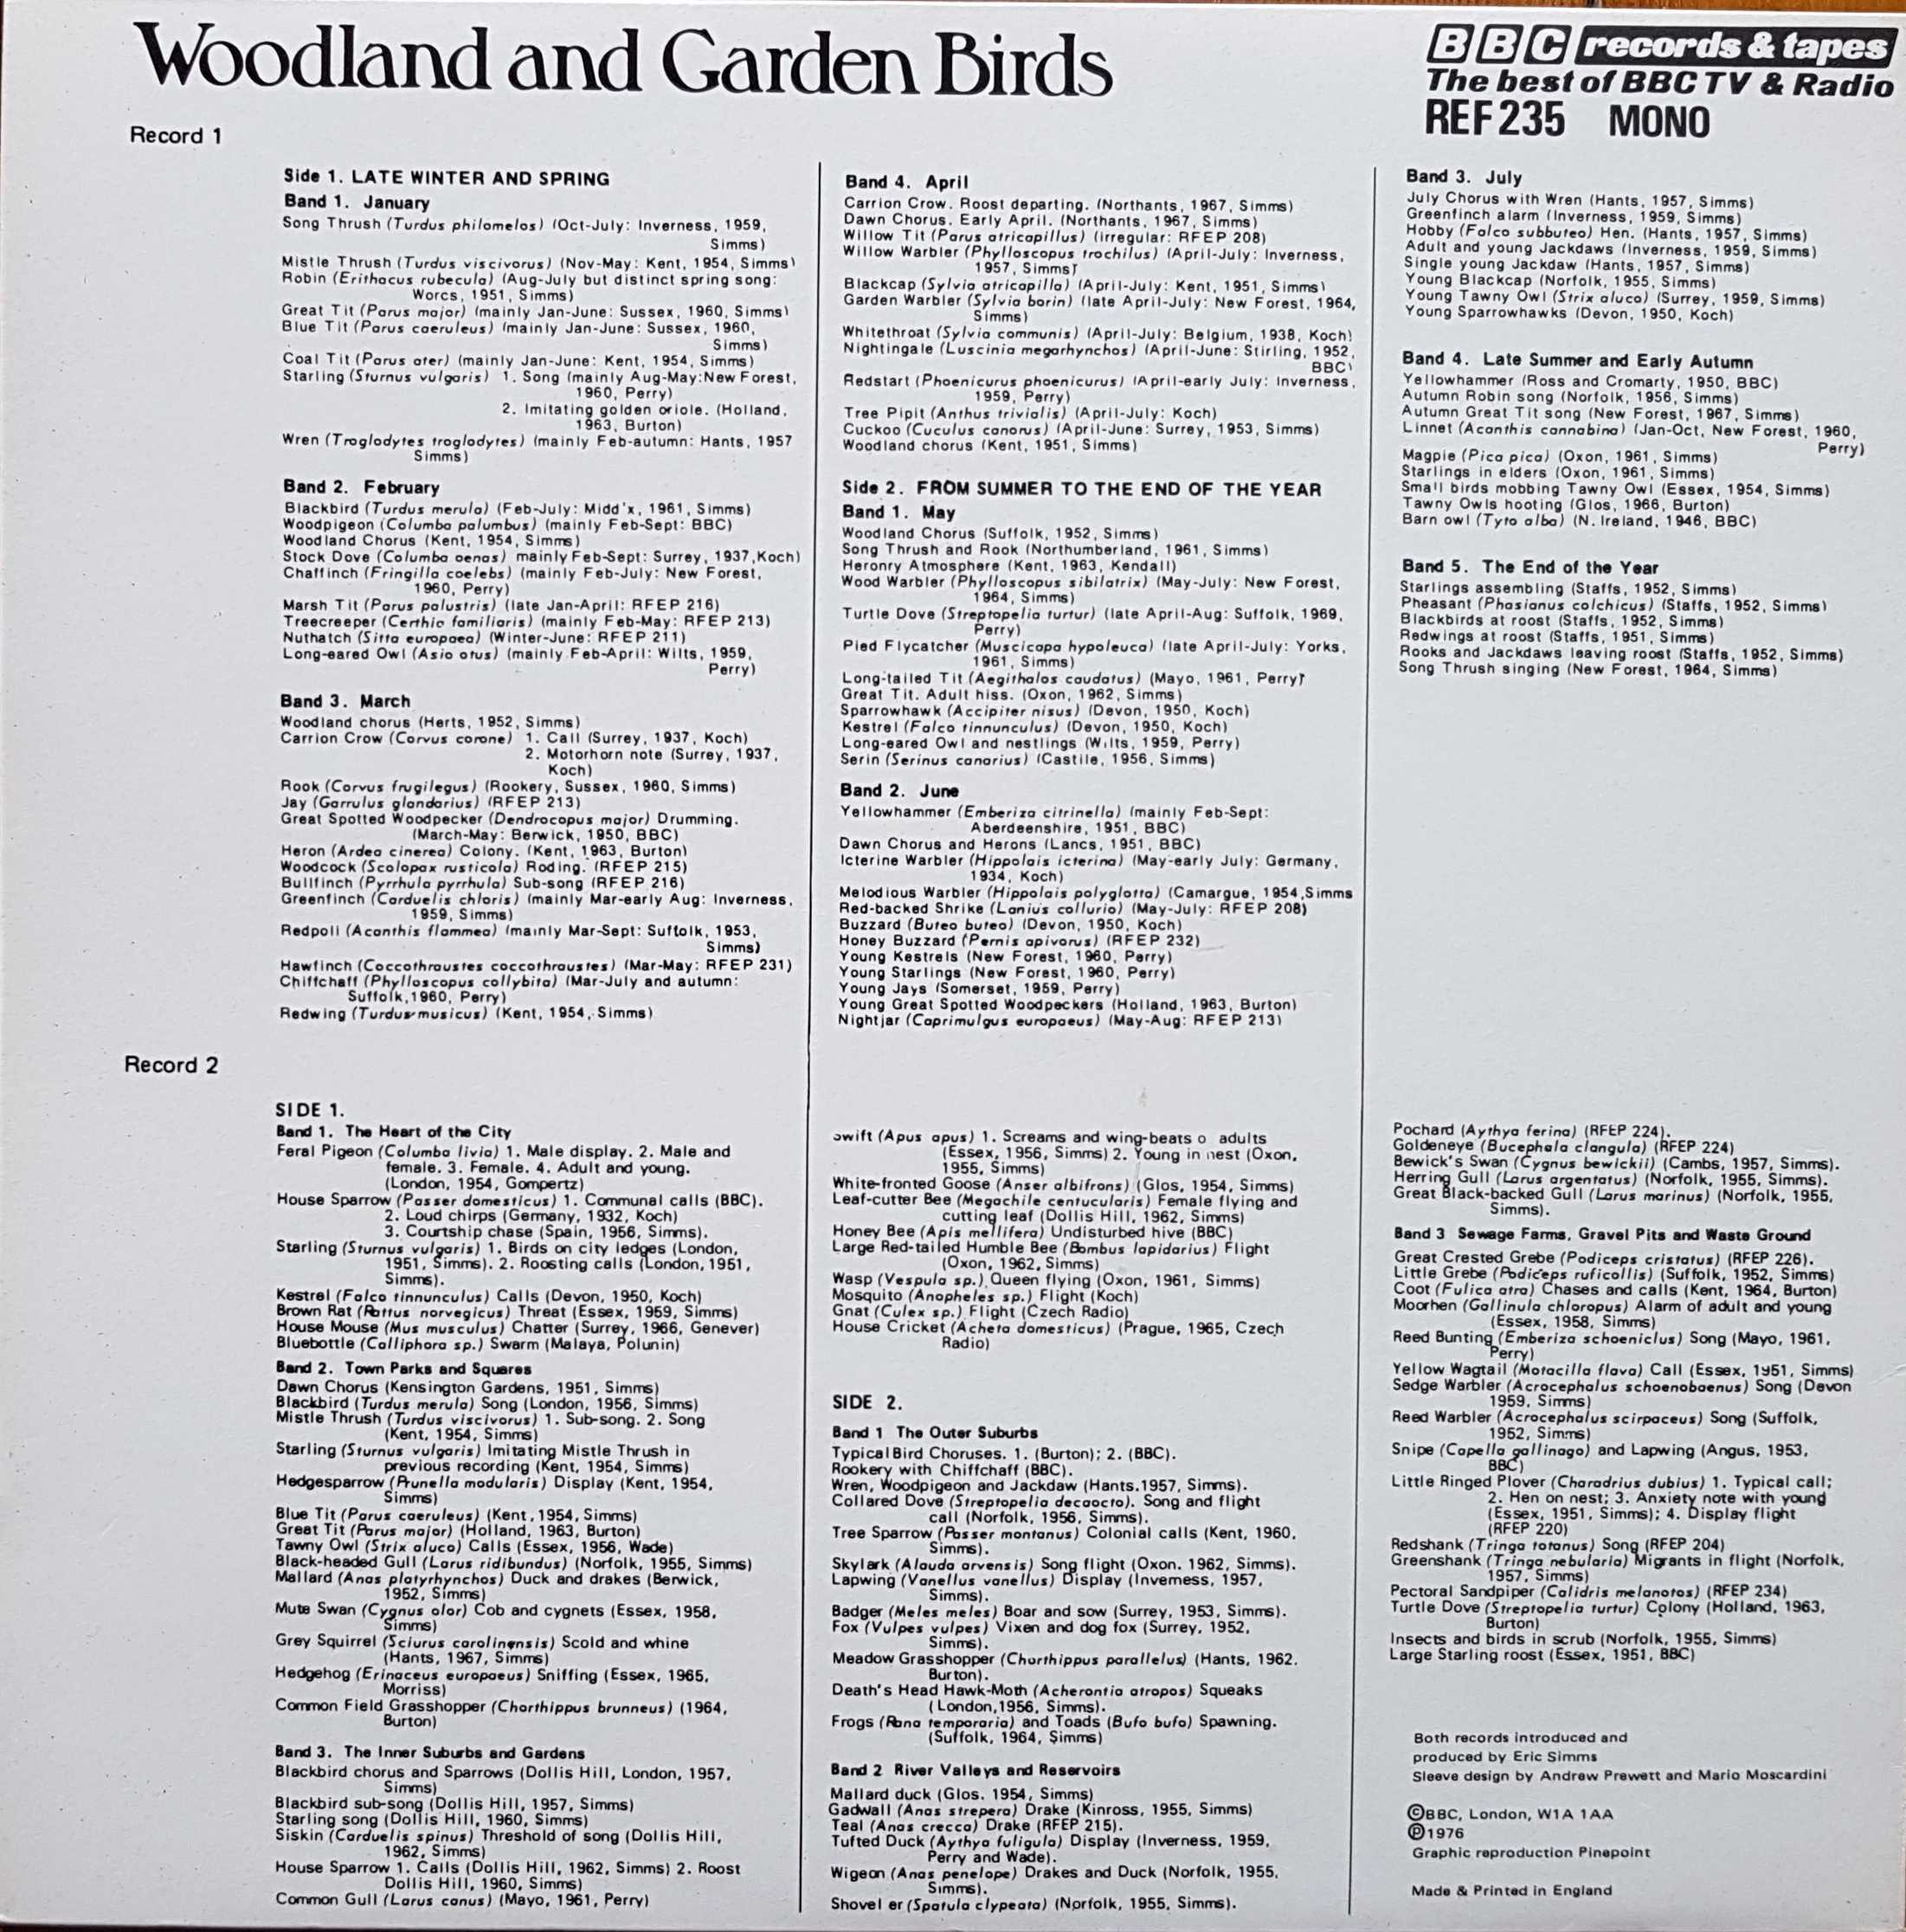 Picture of REF 235 Woodland and garden birds by artist Various from the BBC records and Tapes library